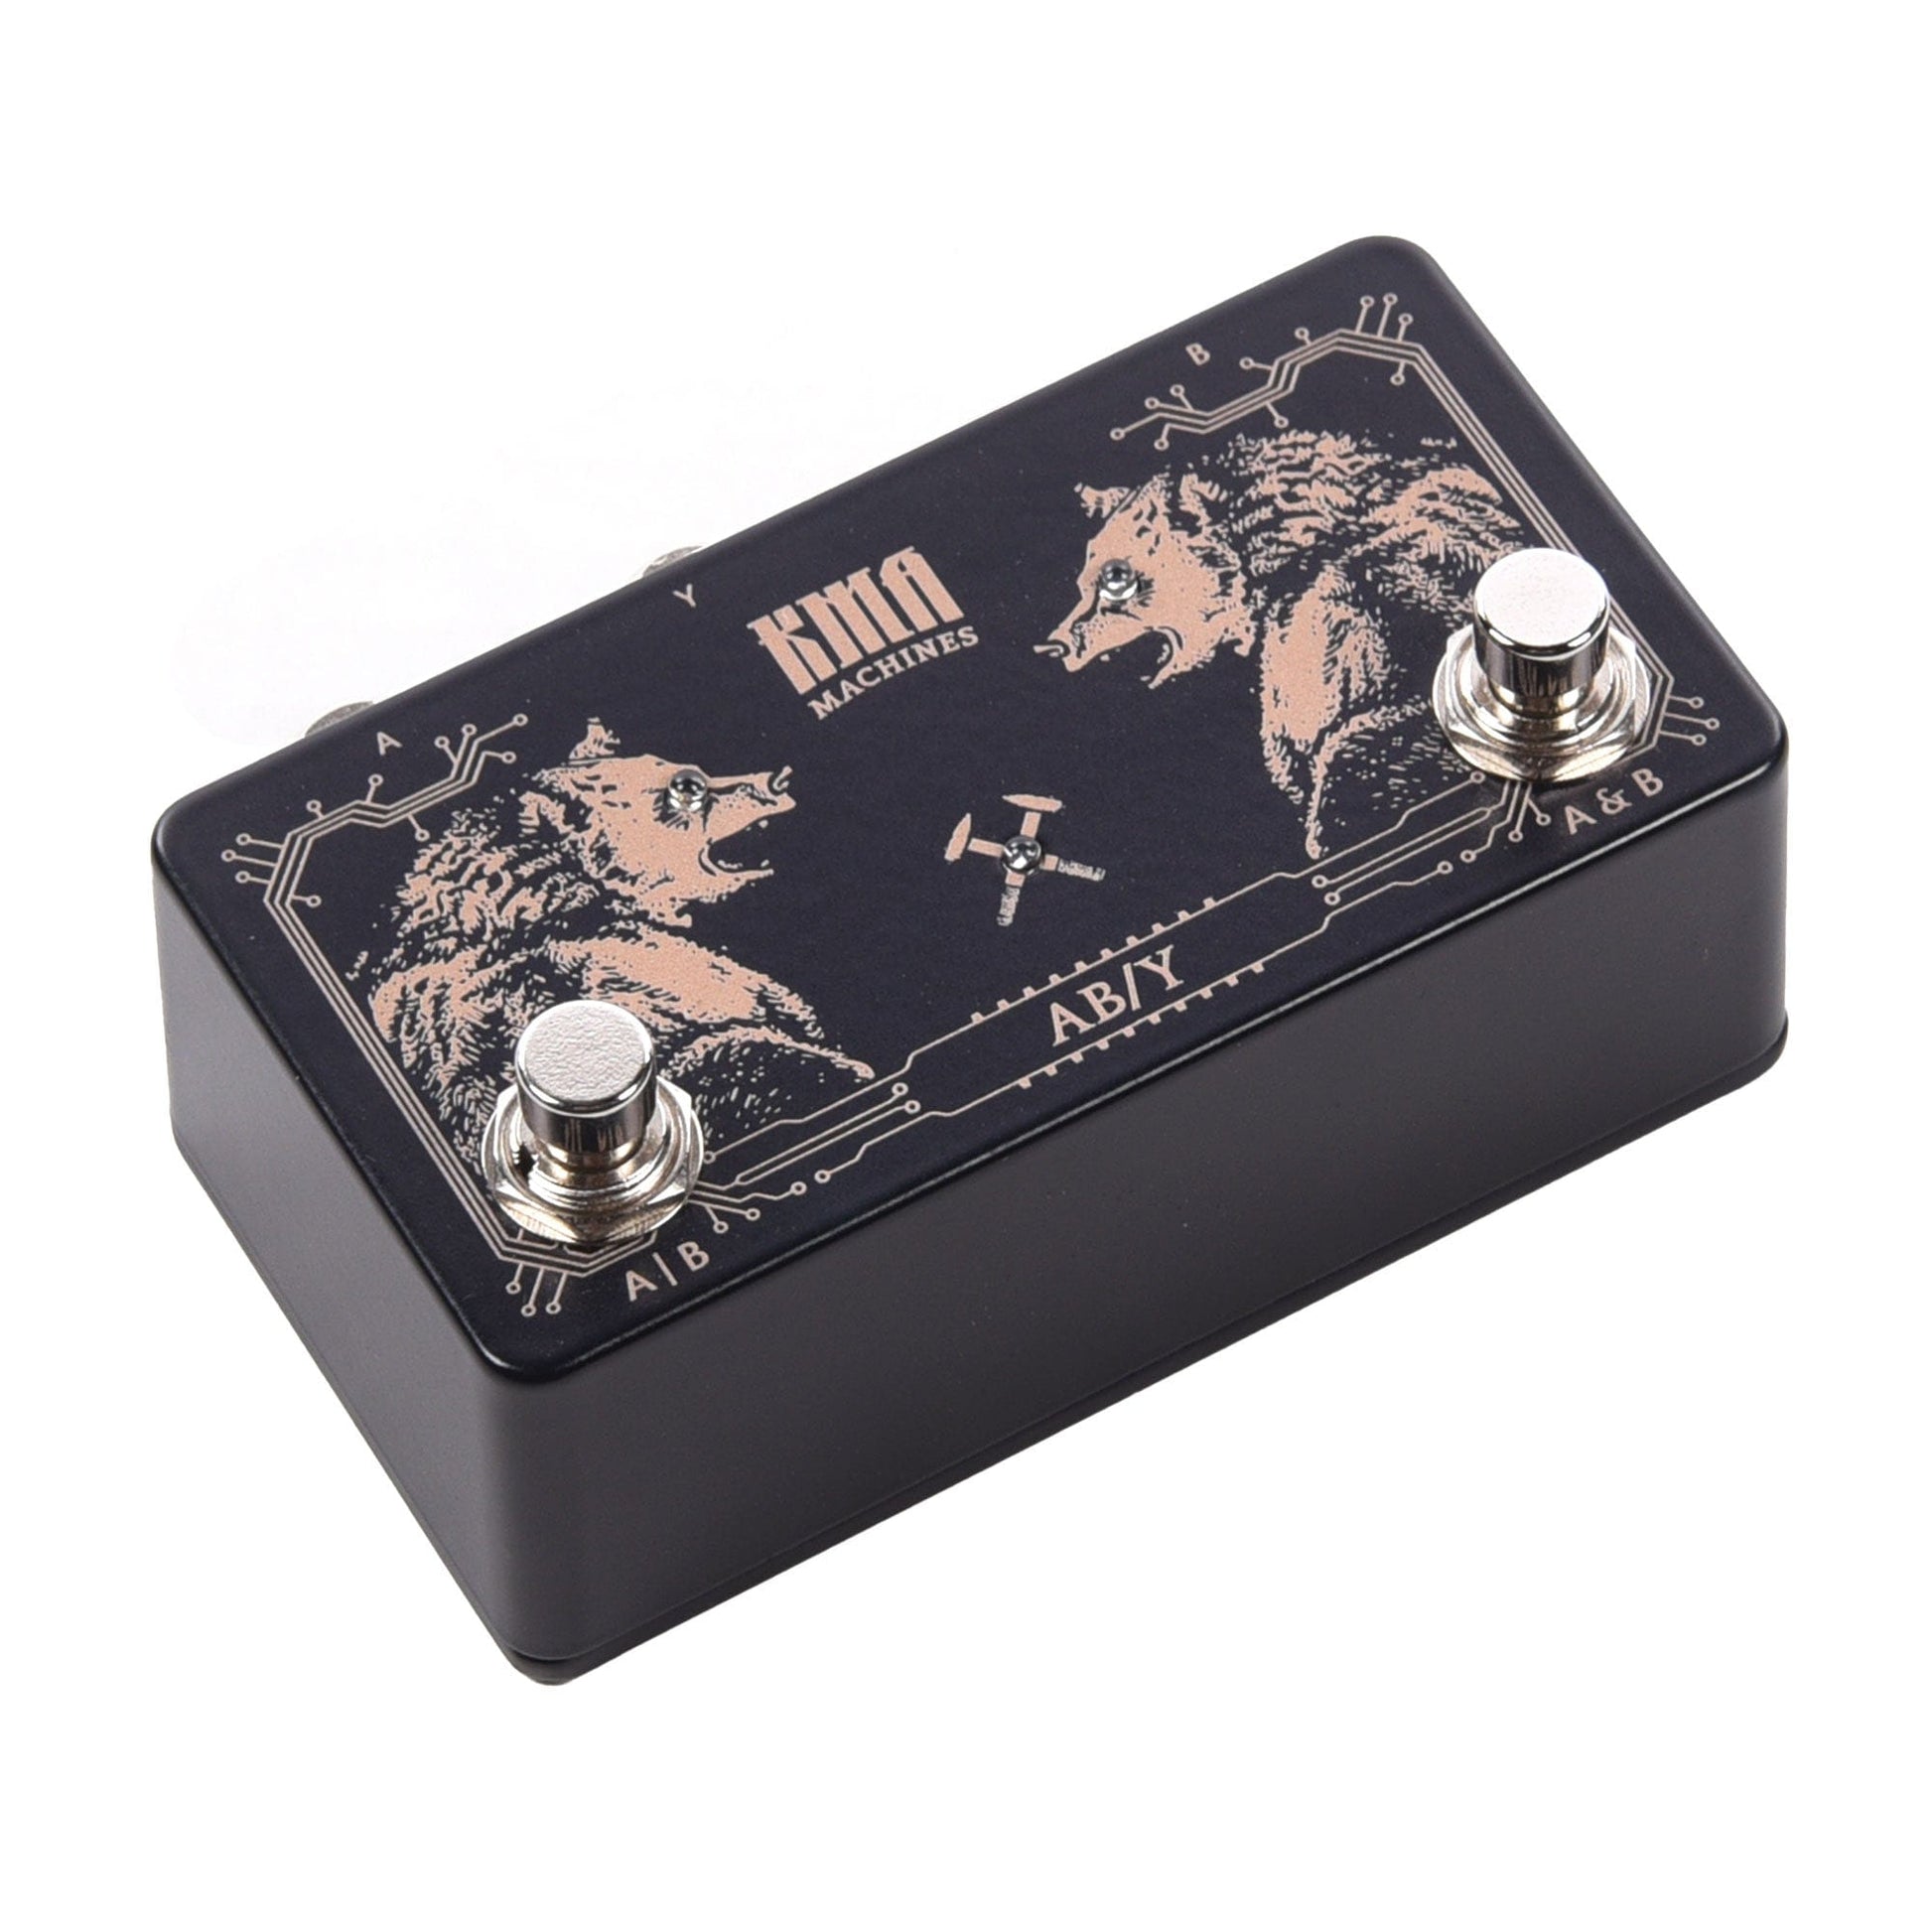 KMA Machines Passive ABY Pedal w/Active Switching Effects and Pedals / Controllers, Volume and Expression